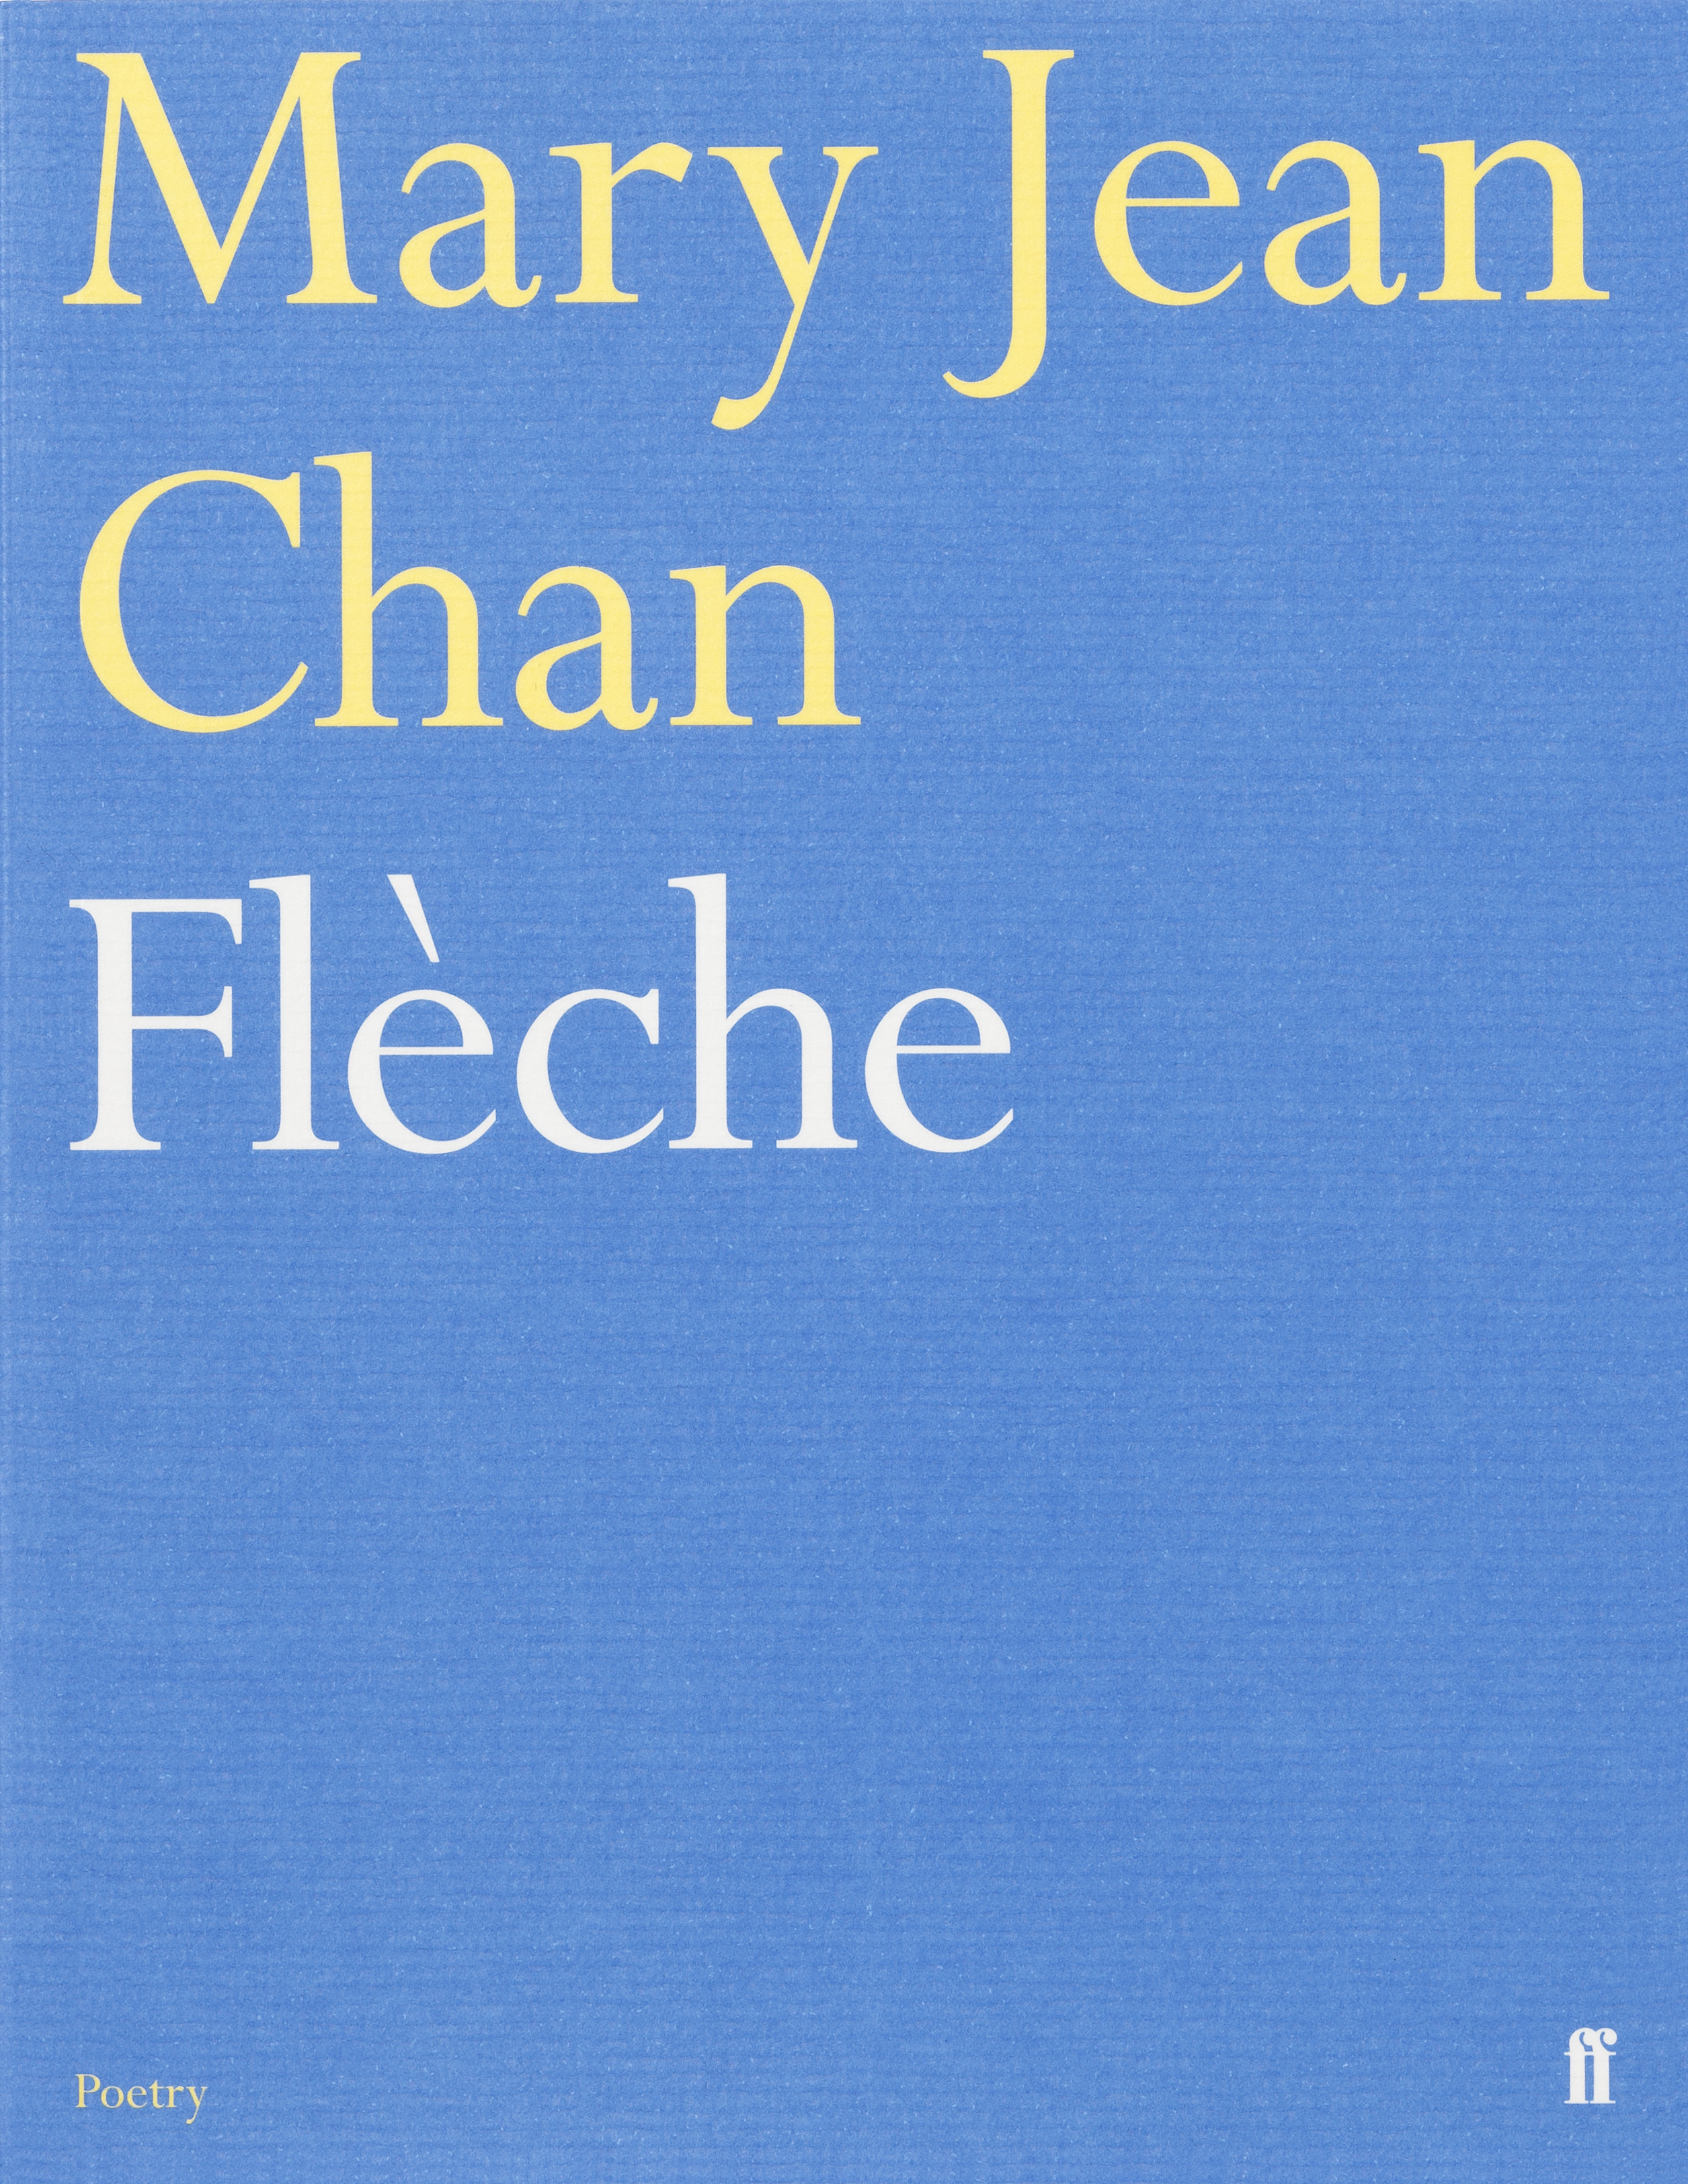 Fleche by Mary Jean Chan 